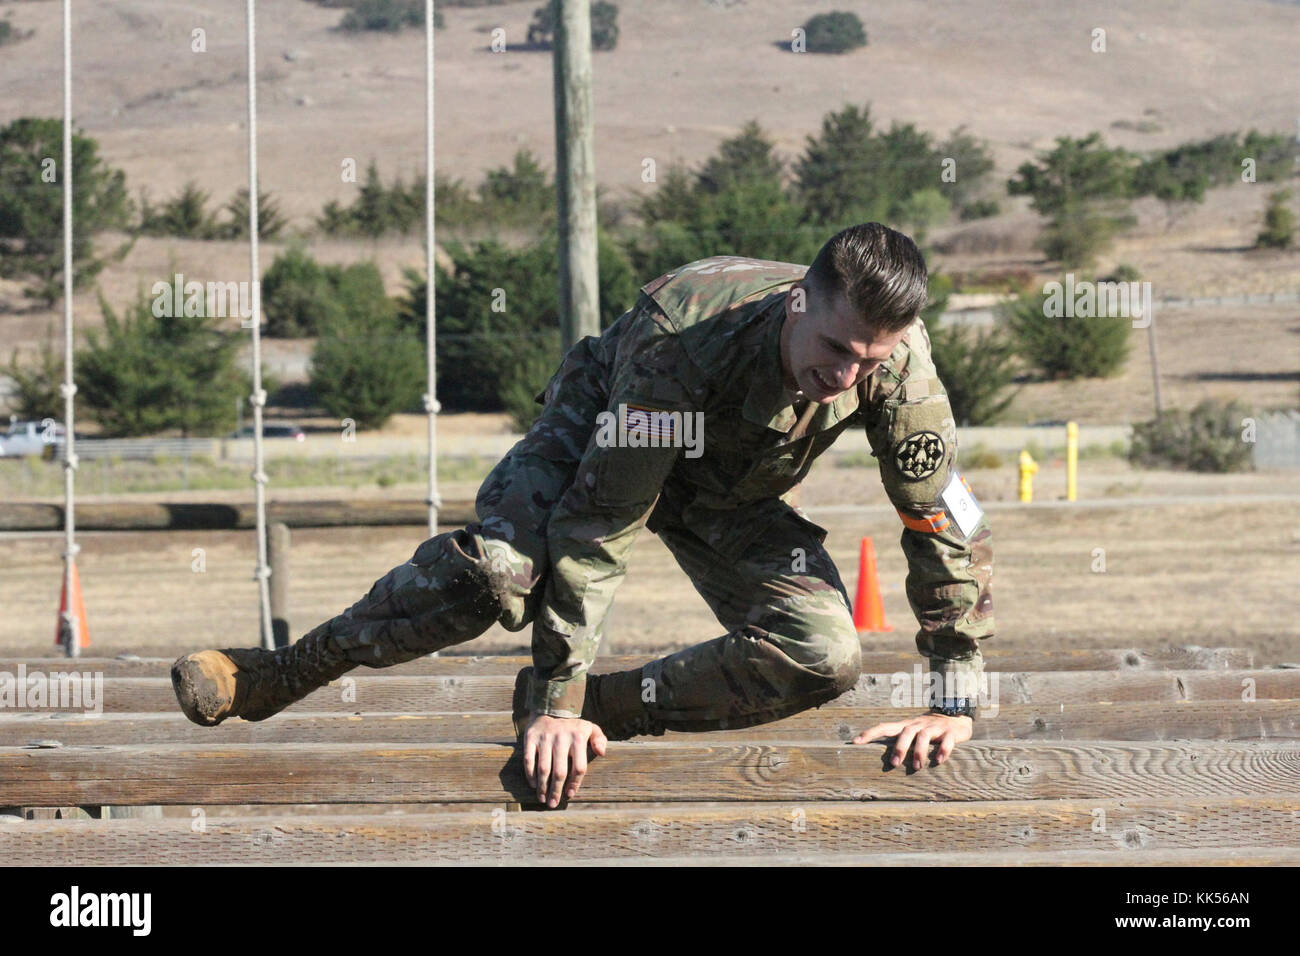 Spc. Devon Witt hurdles an obstacle during Day 3 of a four-day Best Warrior Competition by the California Army National Guard at Camp San Luis Obispo, California. (Army National Guard photo by Staff Sgt. Eddie Siguenza) Stock Photo